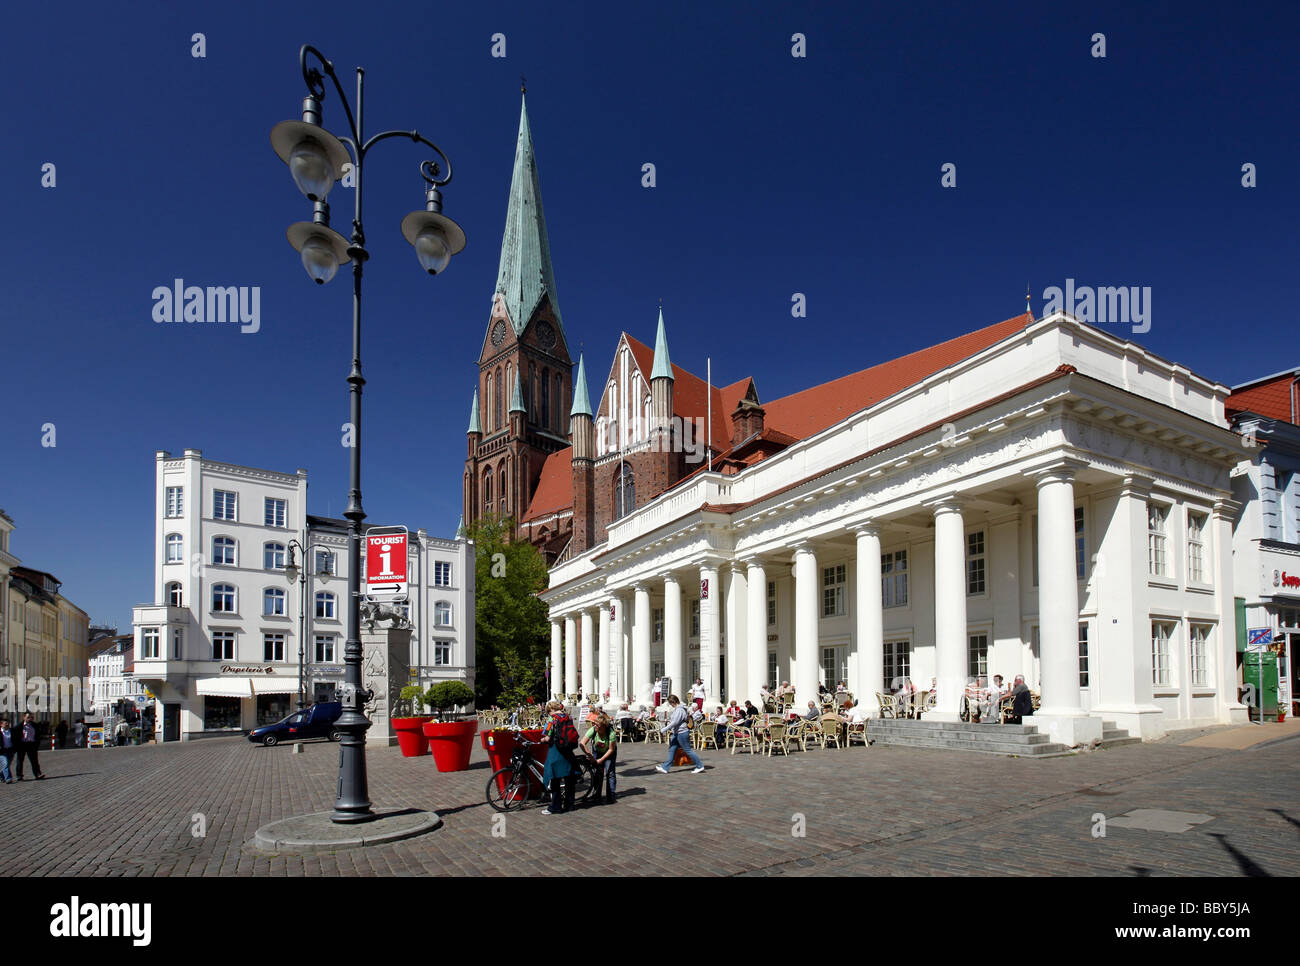 Neues Gebaeude building at the market place and Schweriner Dom cathedral, Schwerin, Mecklenburg-Western Pomerania, Germany, Eur Stock Photo